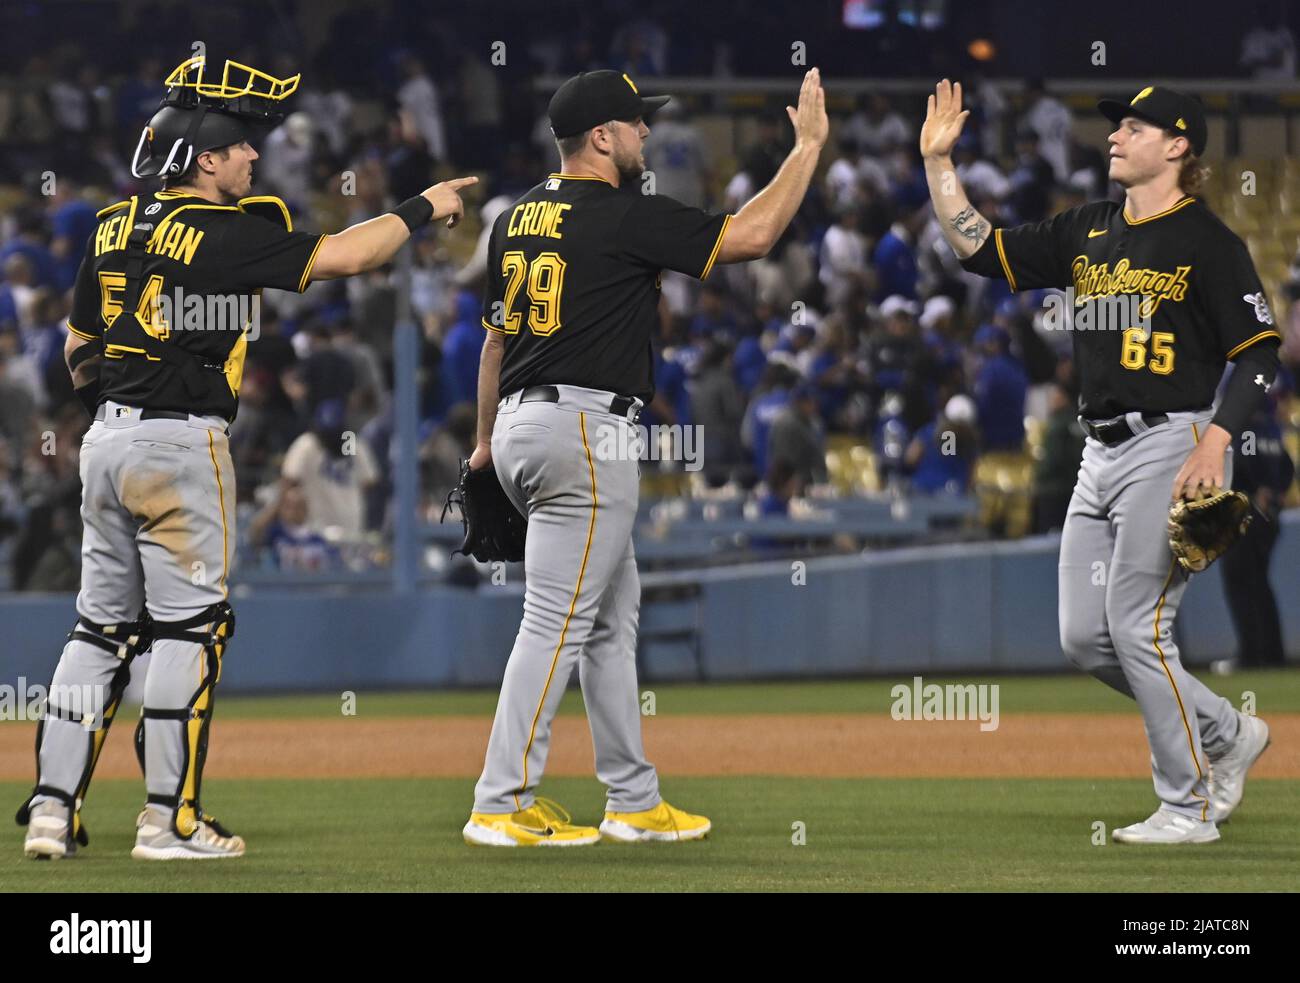 Los Angeles, United States. 01st June, 2022. Pittsburgh Pirates relief pitcher Will Crowe (29) celebrates with teammates after defeating the Los Angeles Dodgers to earn his second season save at Dodger Stadium in Los Angeles on Tuesday May 31, 2022. The Prates beat the Dodgers 5-3 for their second series win. Photo by Jim Ruymen/UPI Credit: UPI/Alamy Live News Stock Photo